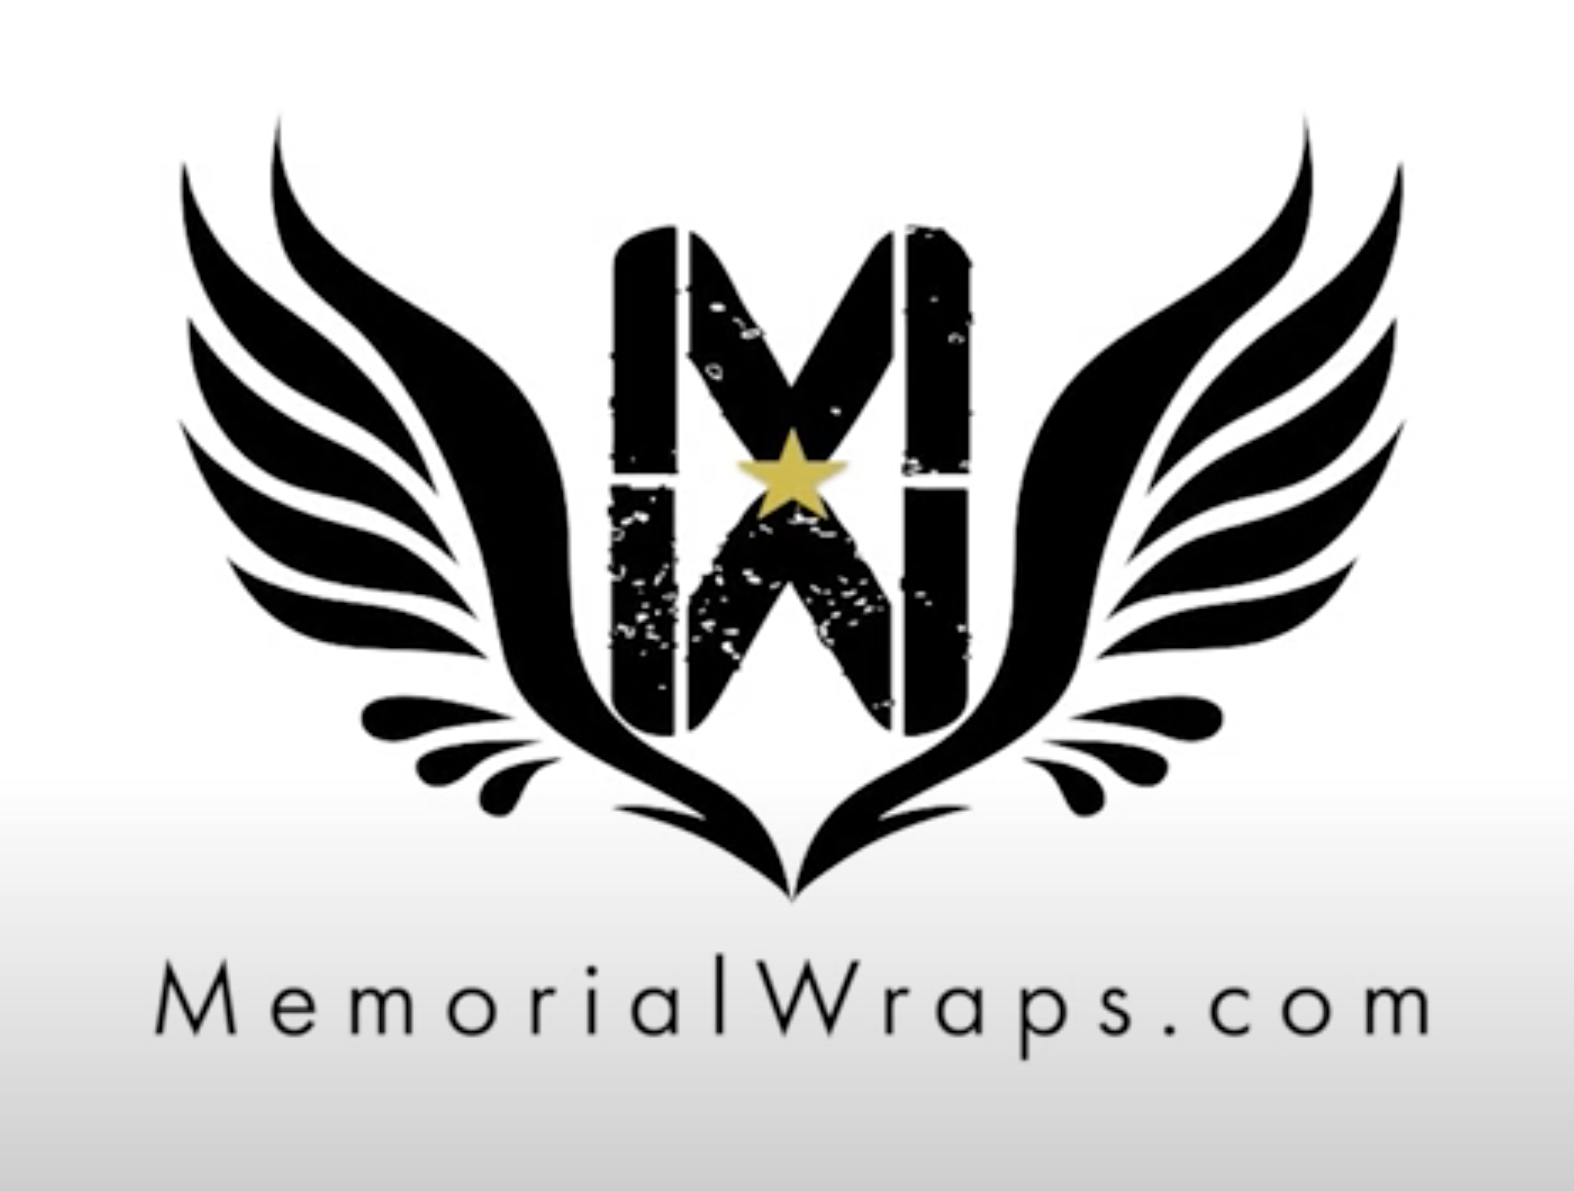 MEMORIAL WRAPS ARE HERE!